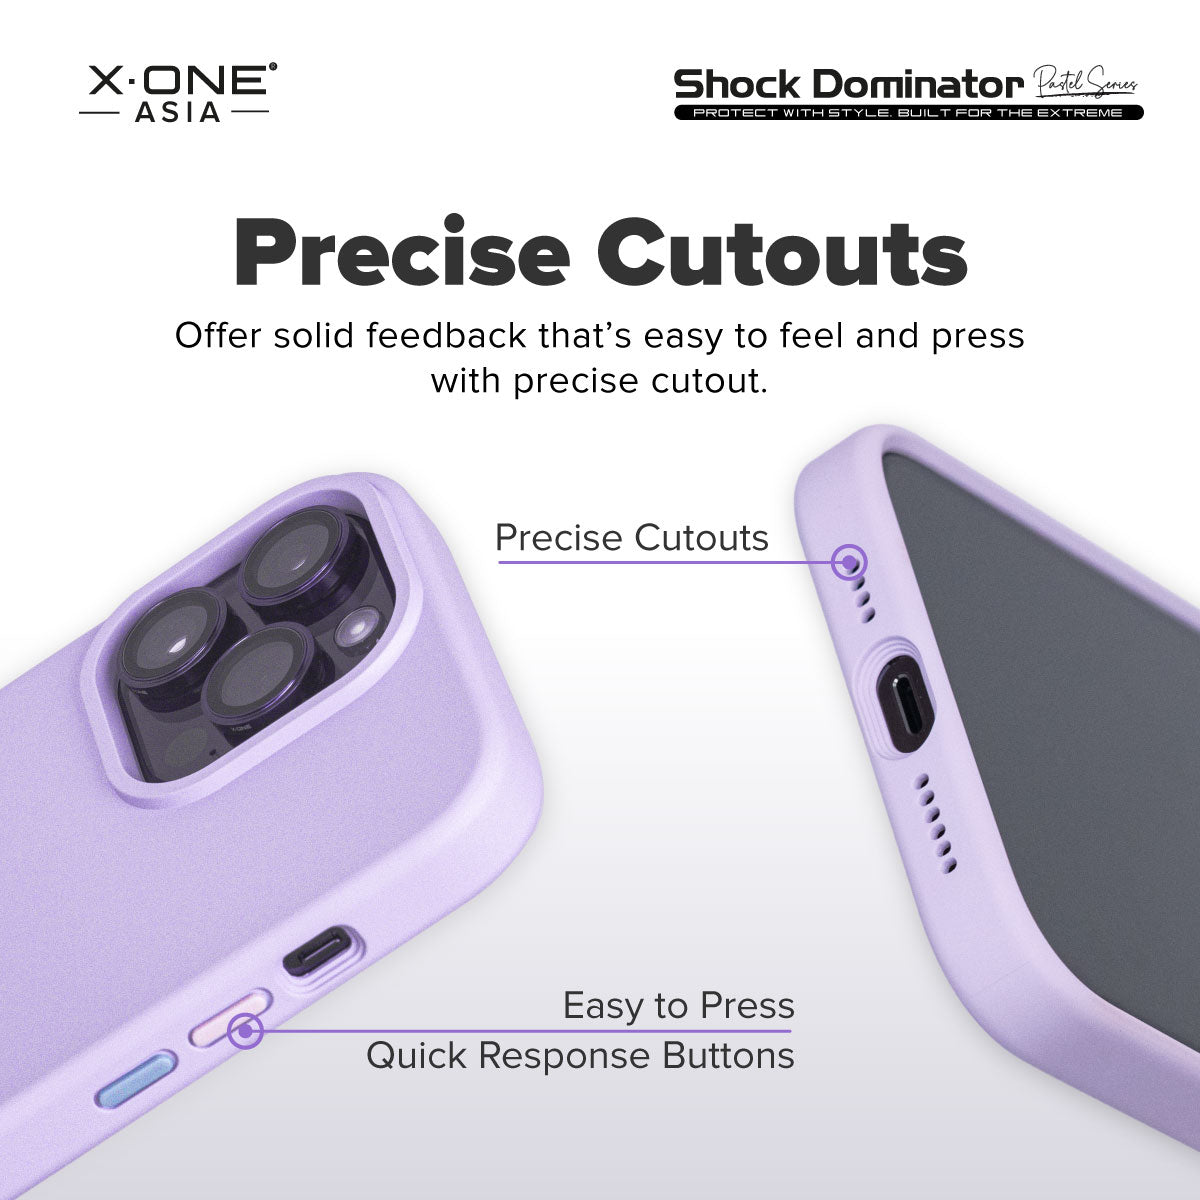 X.One® Shock Dominator (Pastel Series) Impact Protection Case for iPhone 14 Series